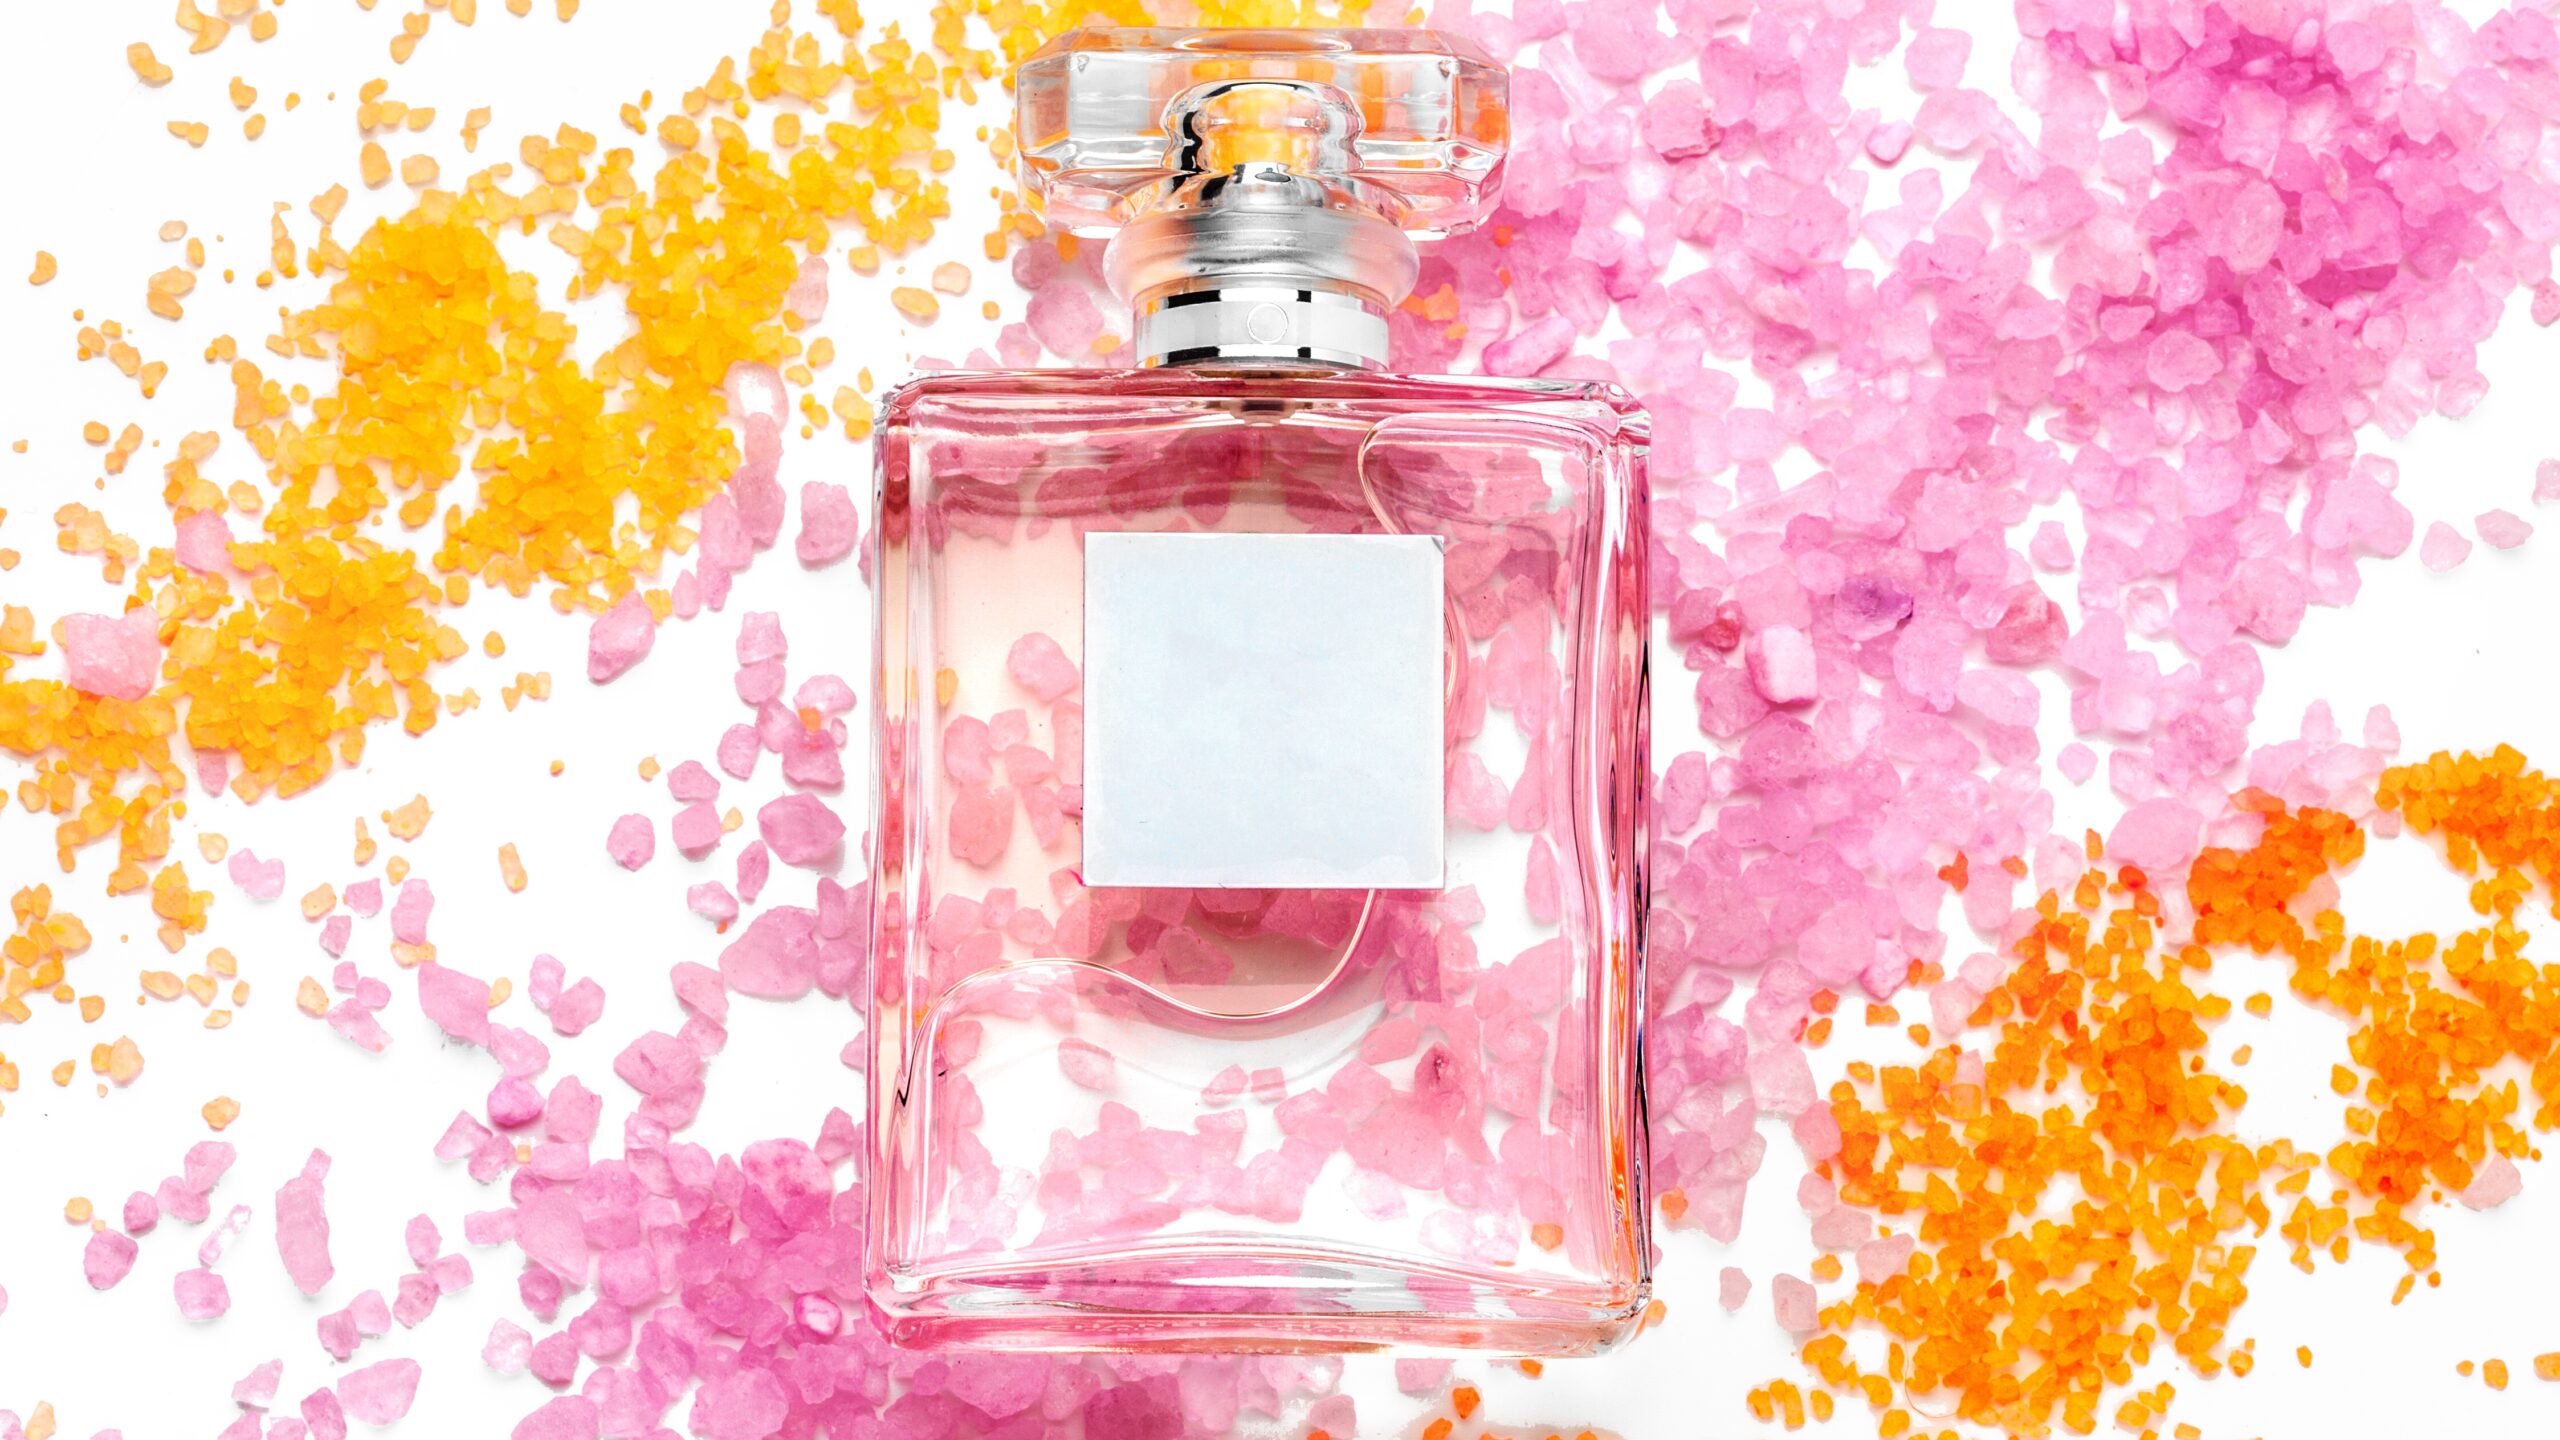 The Art of Perfumery: A Guide to the Different Types of Scents